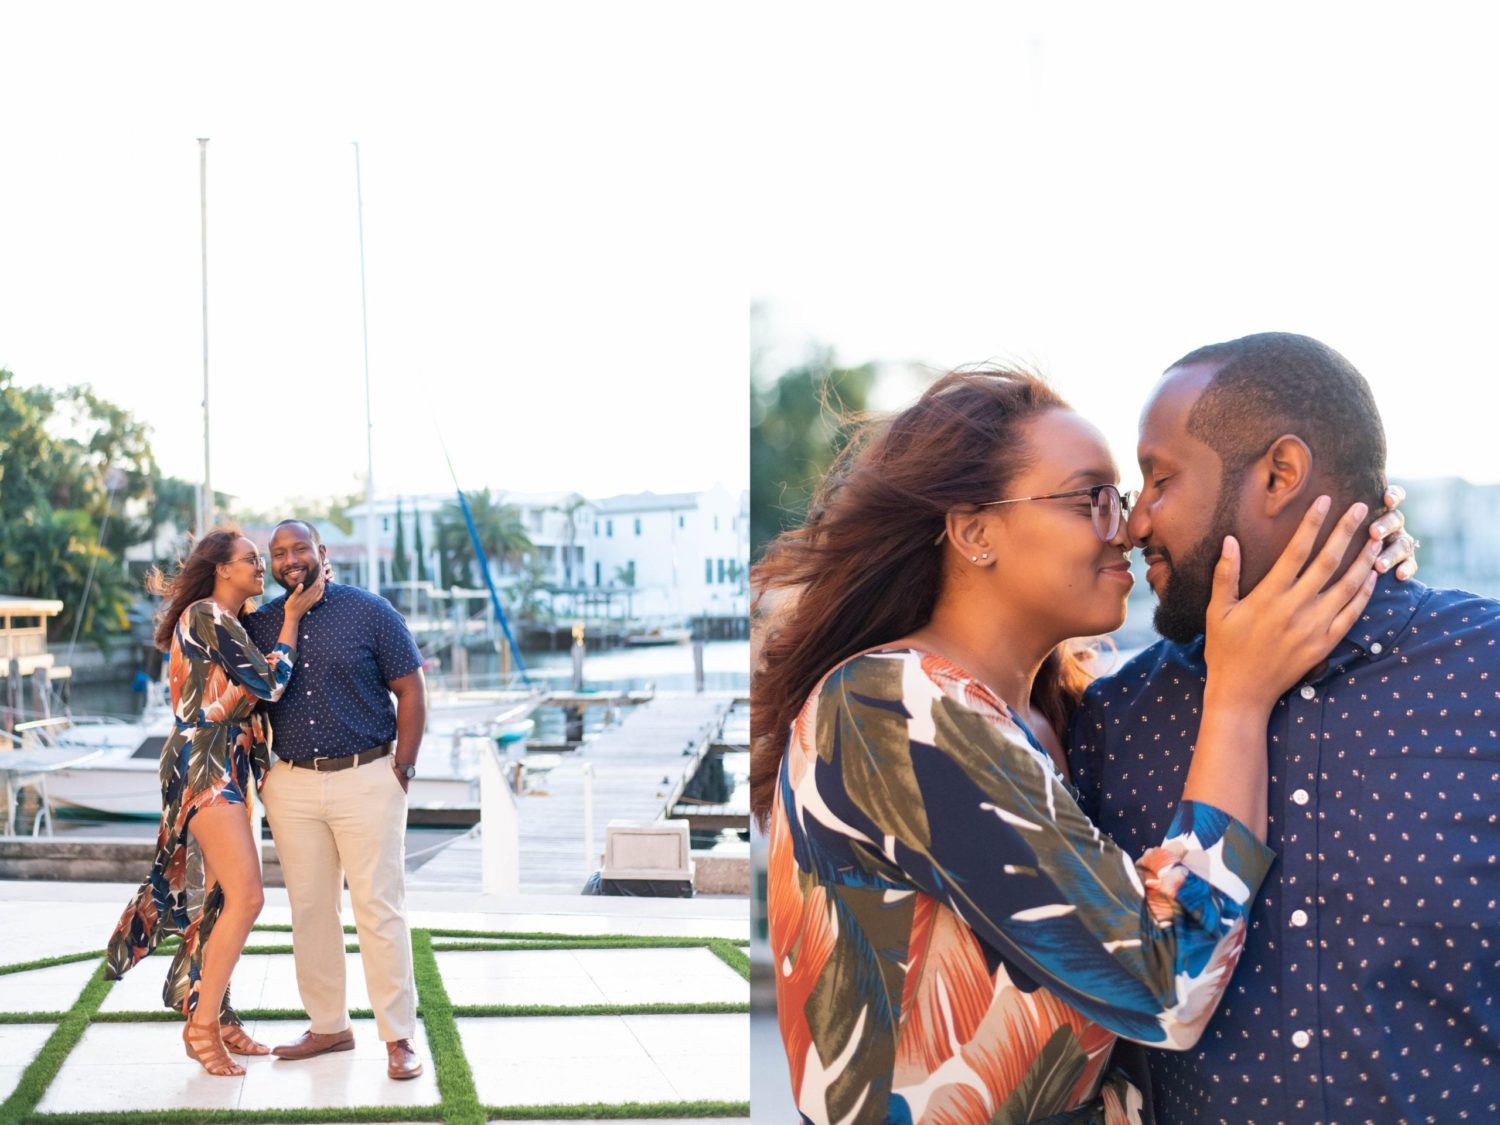 Romantic Davis Island engagement session at sunset in tampa bay florida couple wearing navy and orange dress and shirt posing hugging each other by the pier and the boats